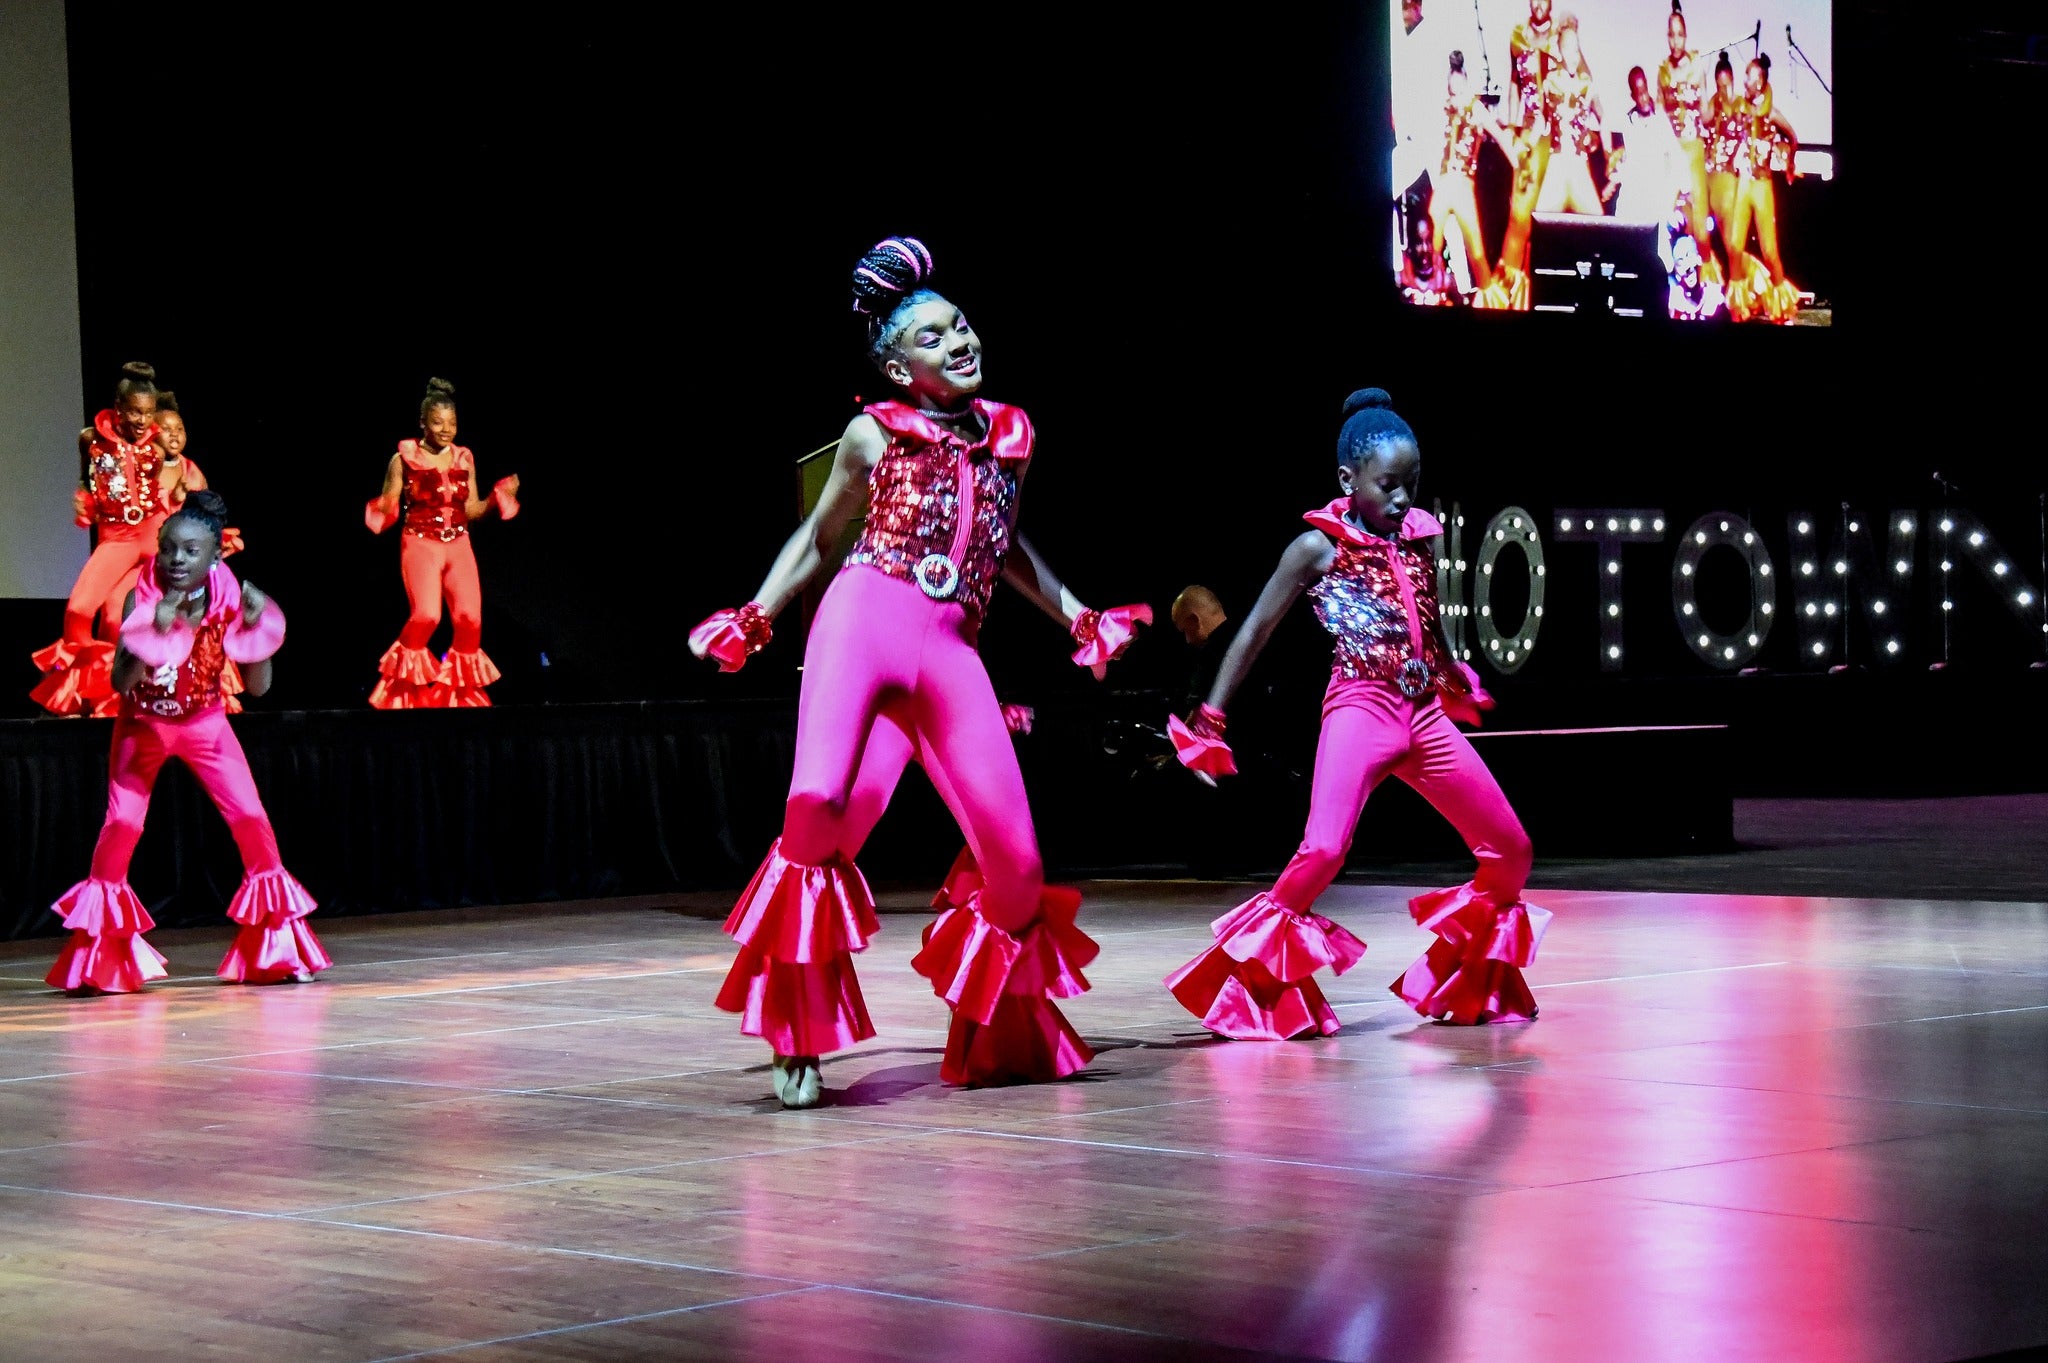 Youth in fuchsia outfits dance to Motown music on stage.